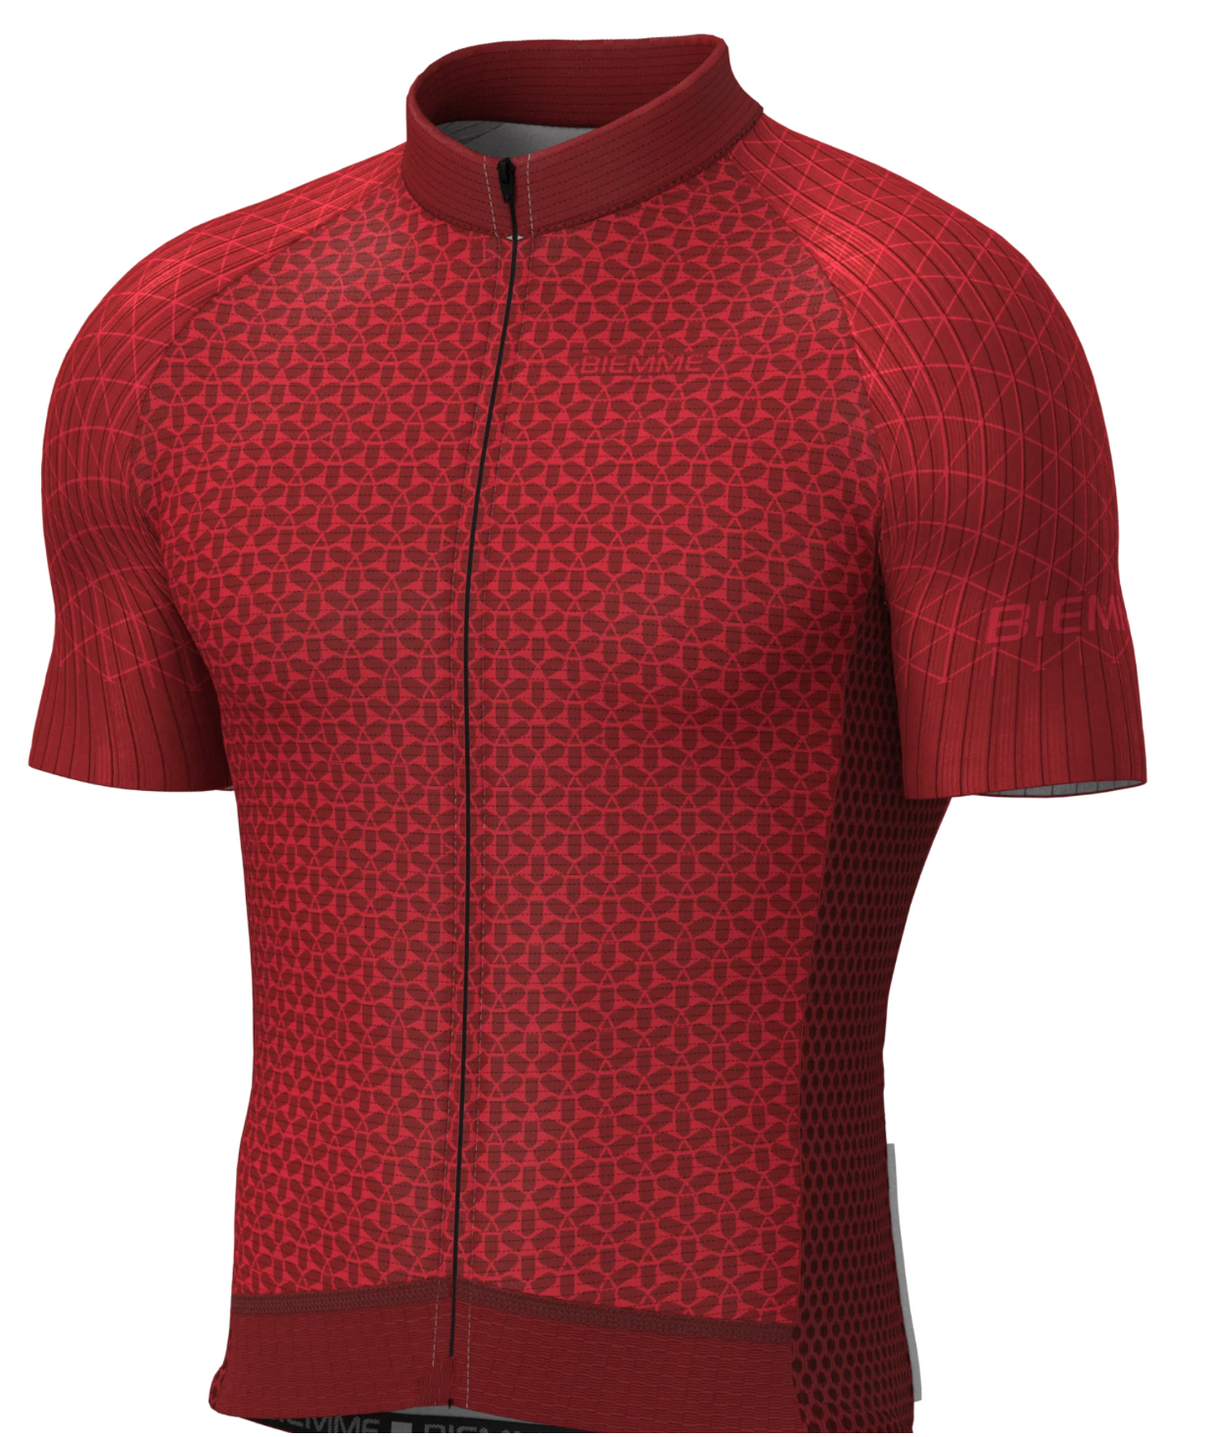 Biemme Venus Mens Cycling Jersey - Red - Large - Made in Italy Sporting Goods > Cycling > Cycling Clothing > Jerseys Biemme Cycling Clothing Biemme